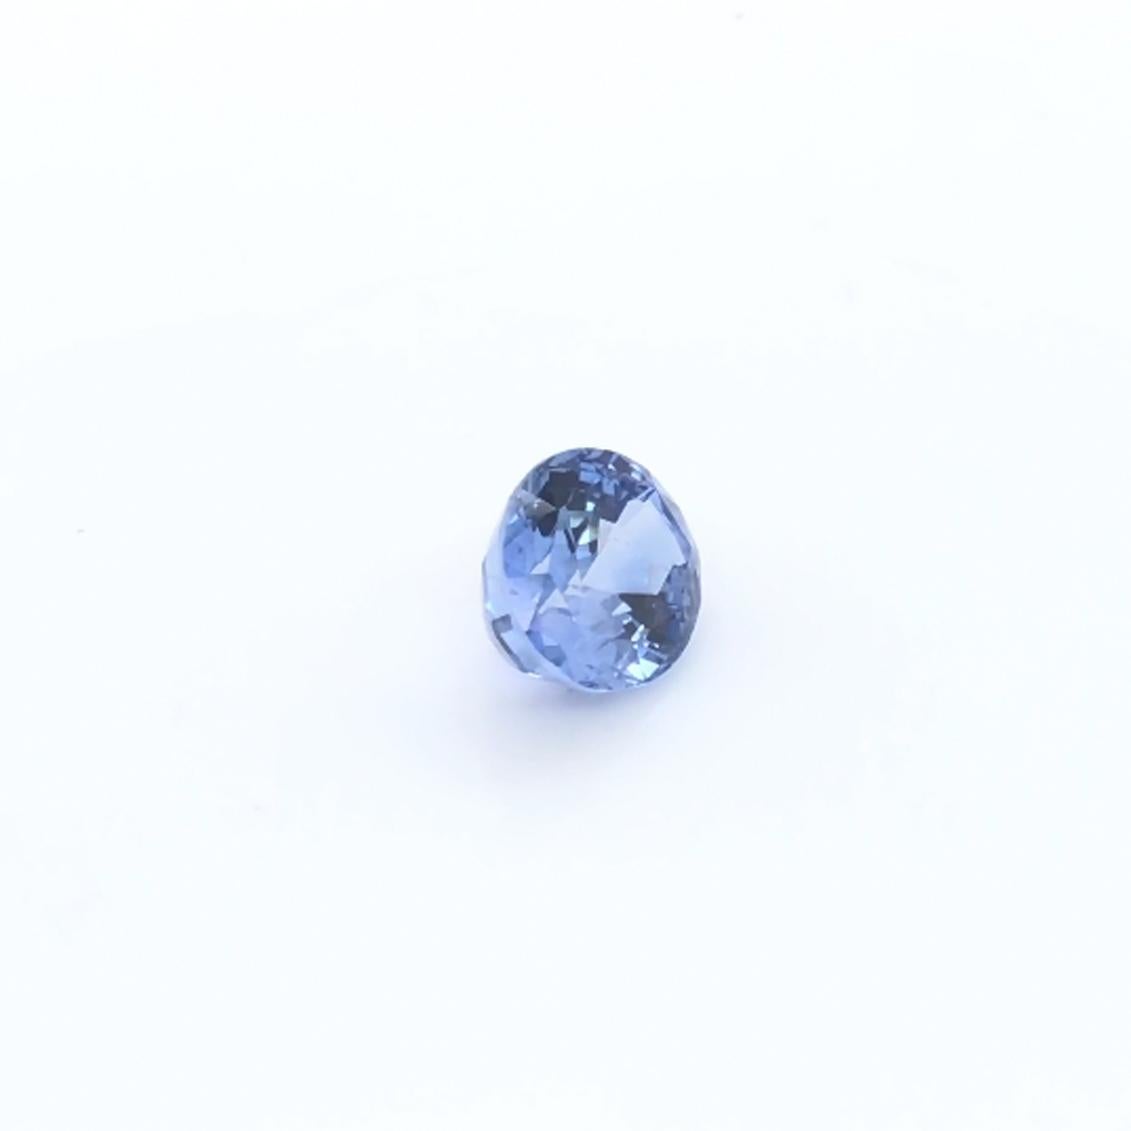 GIA and Bellerophon Certified 4.23ct Blue Sapphire Natural Gemstone For Sale 1